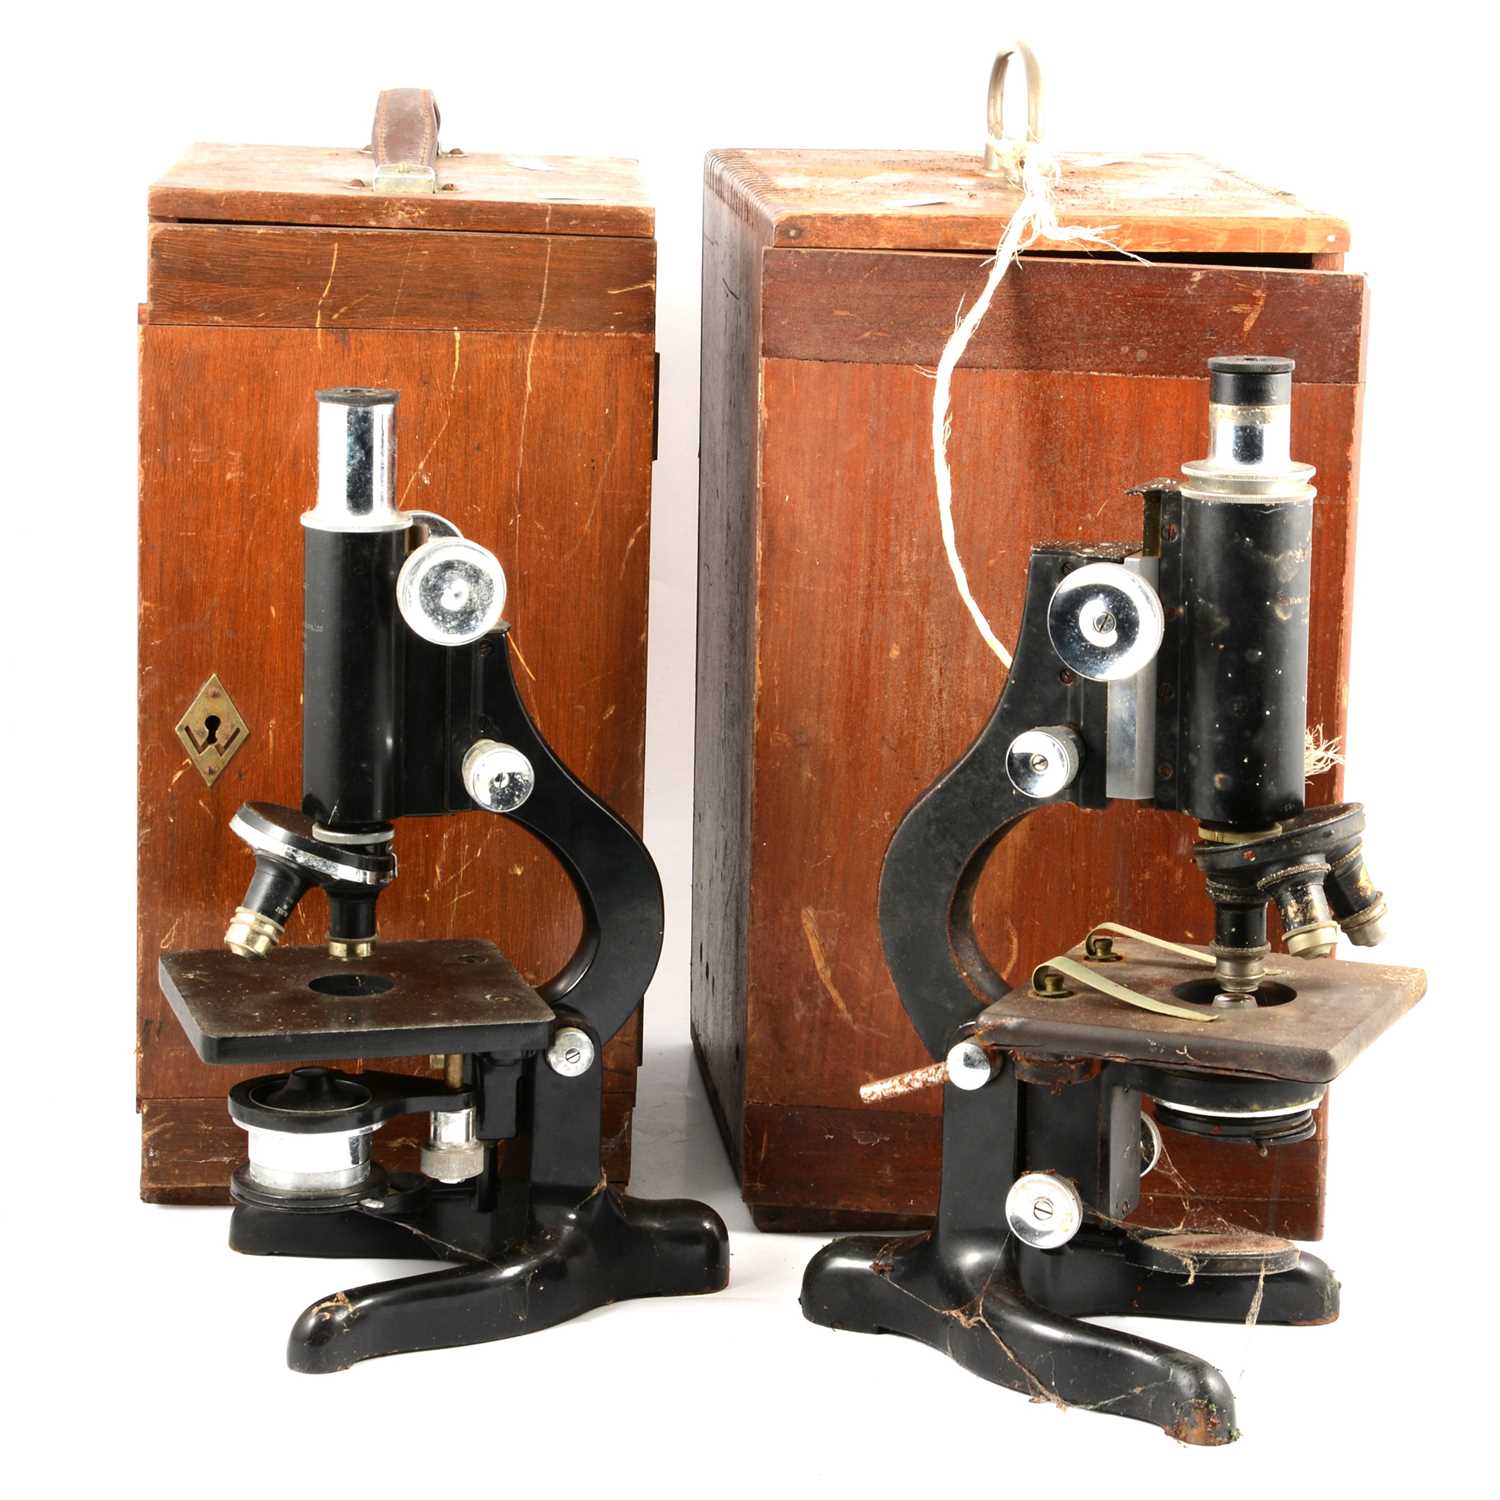 Two early 20th century microscopes.